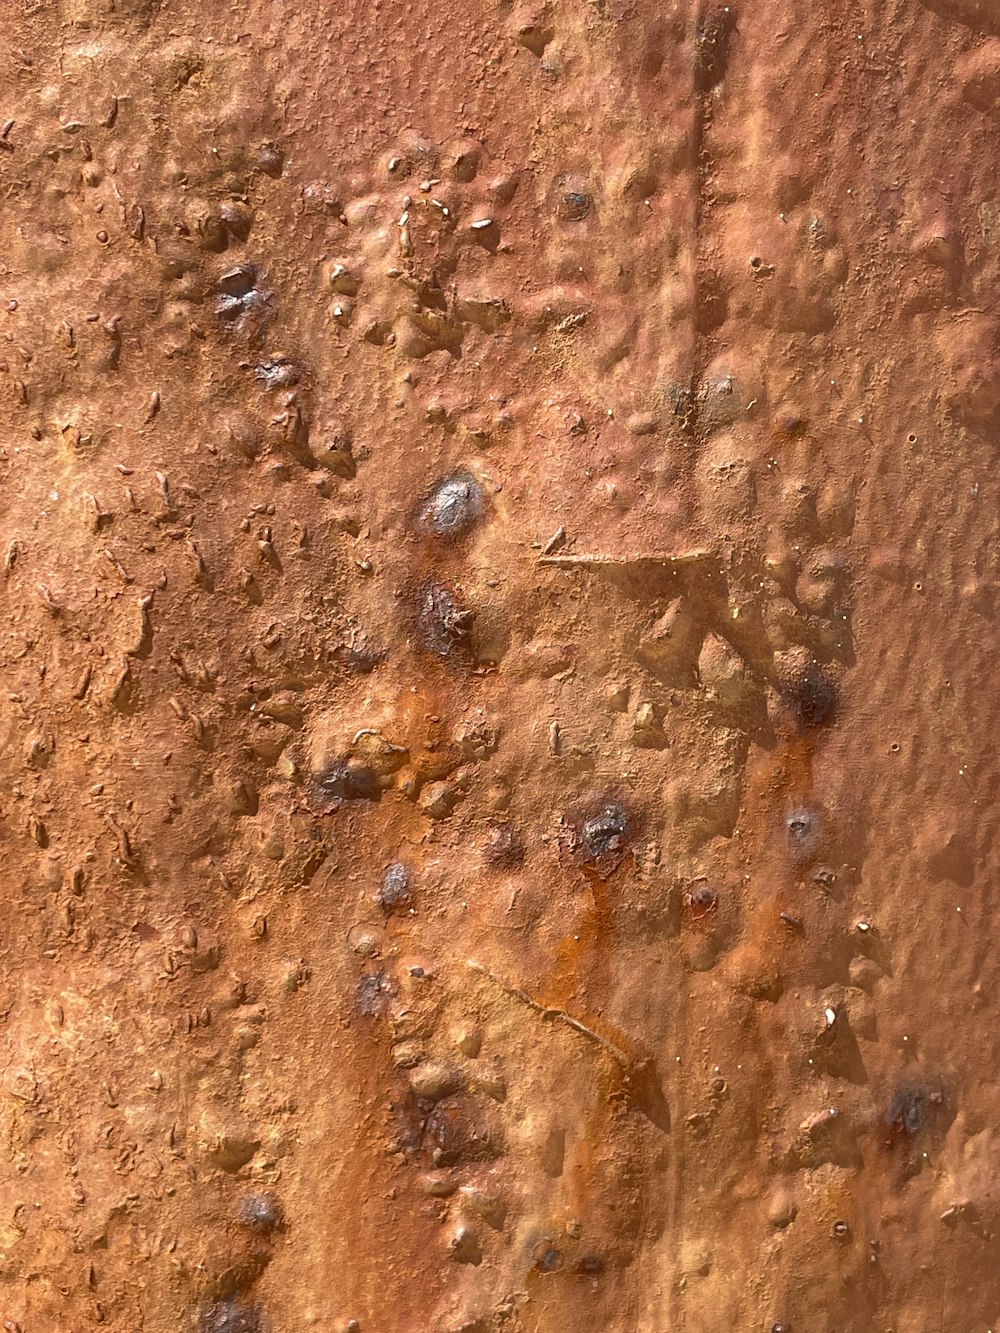 brown and black ant on brown soil